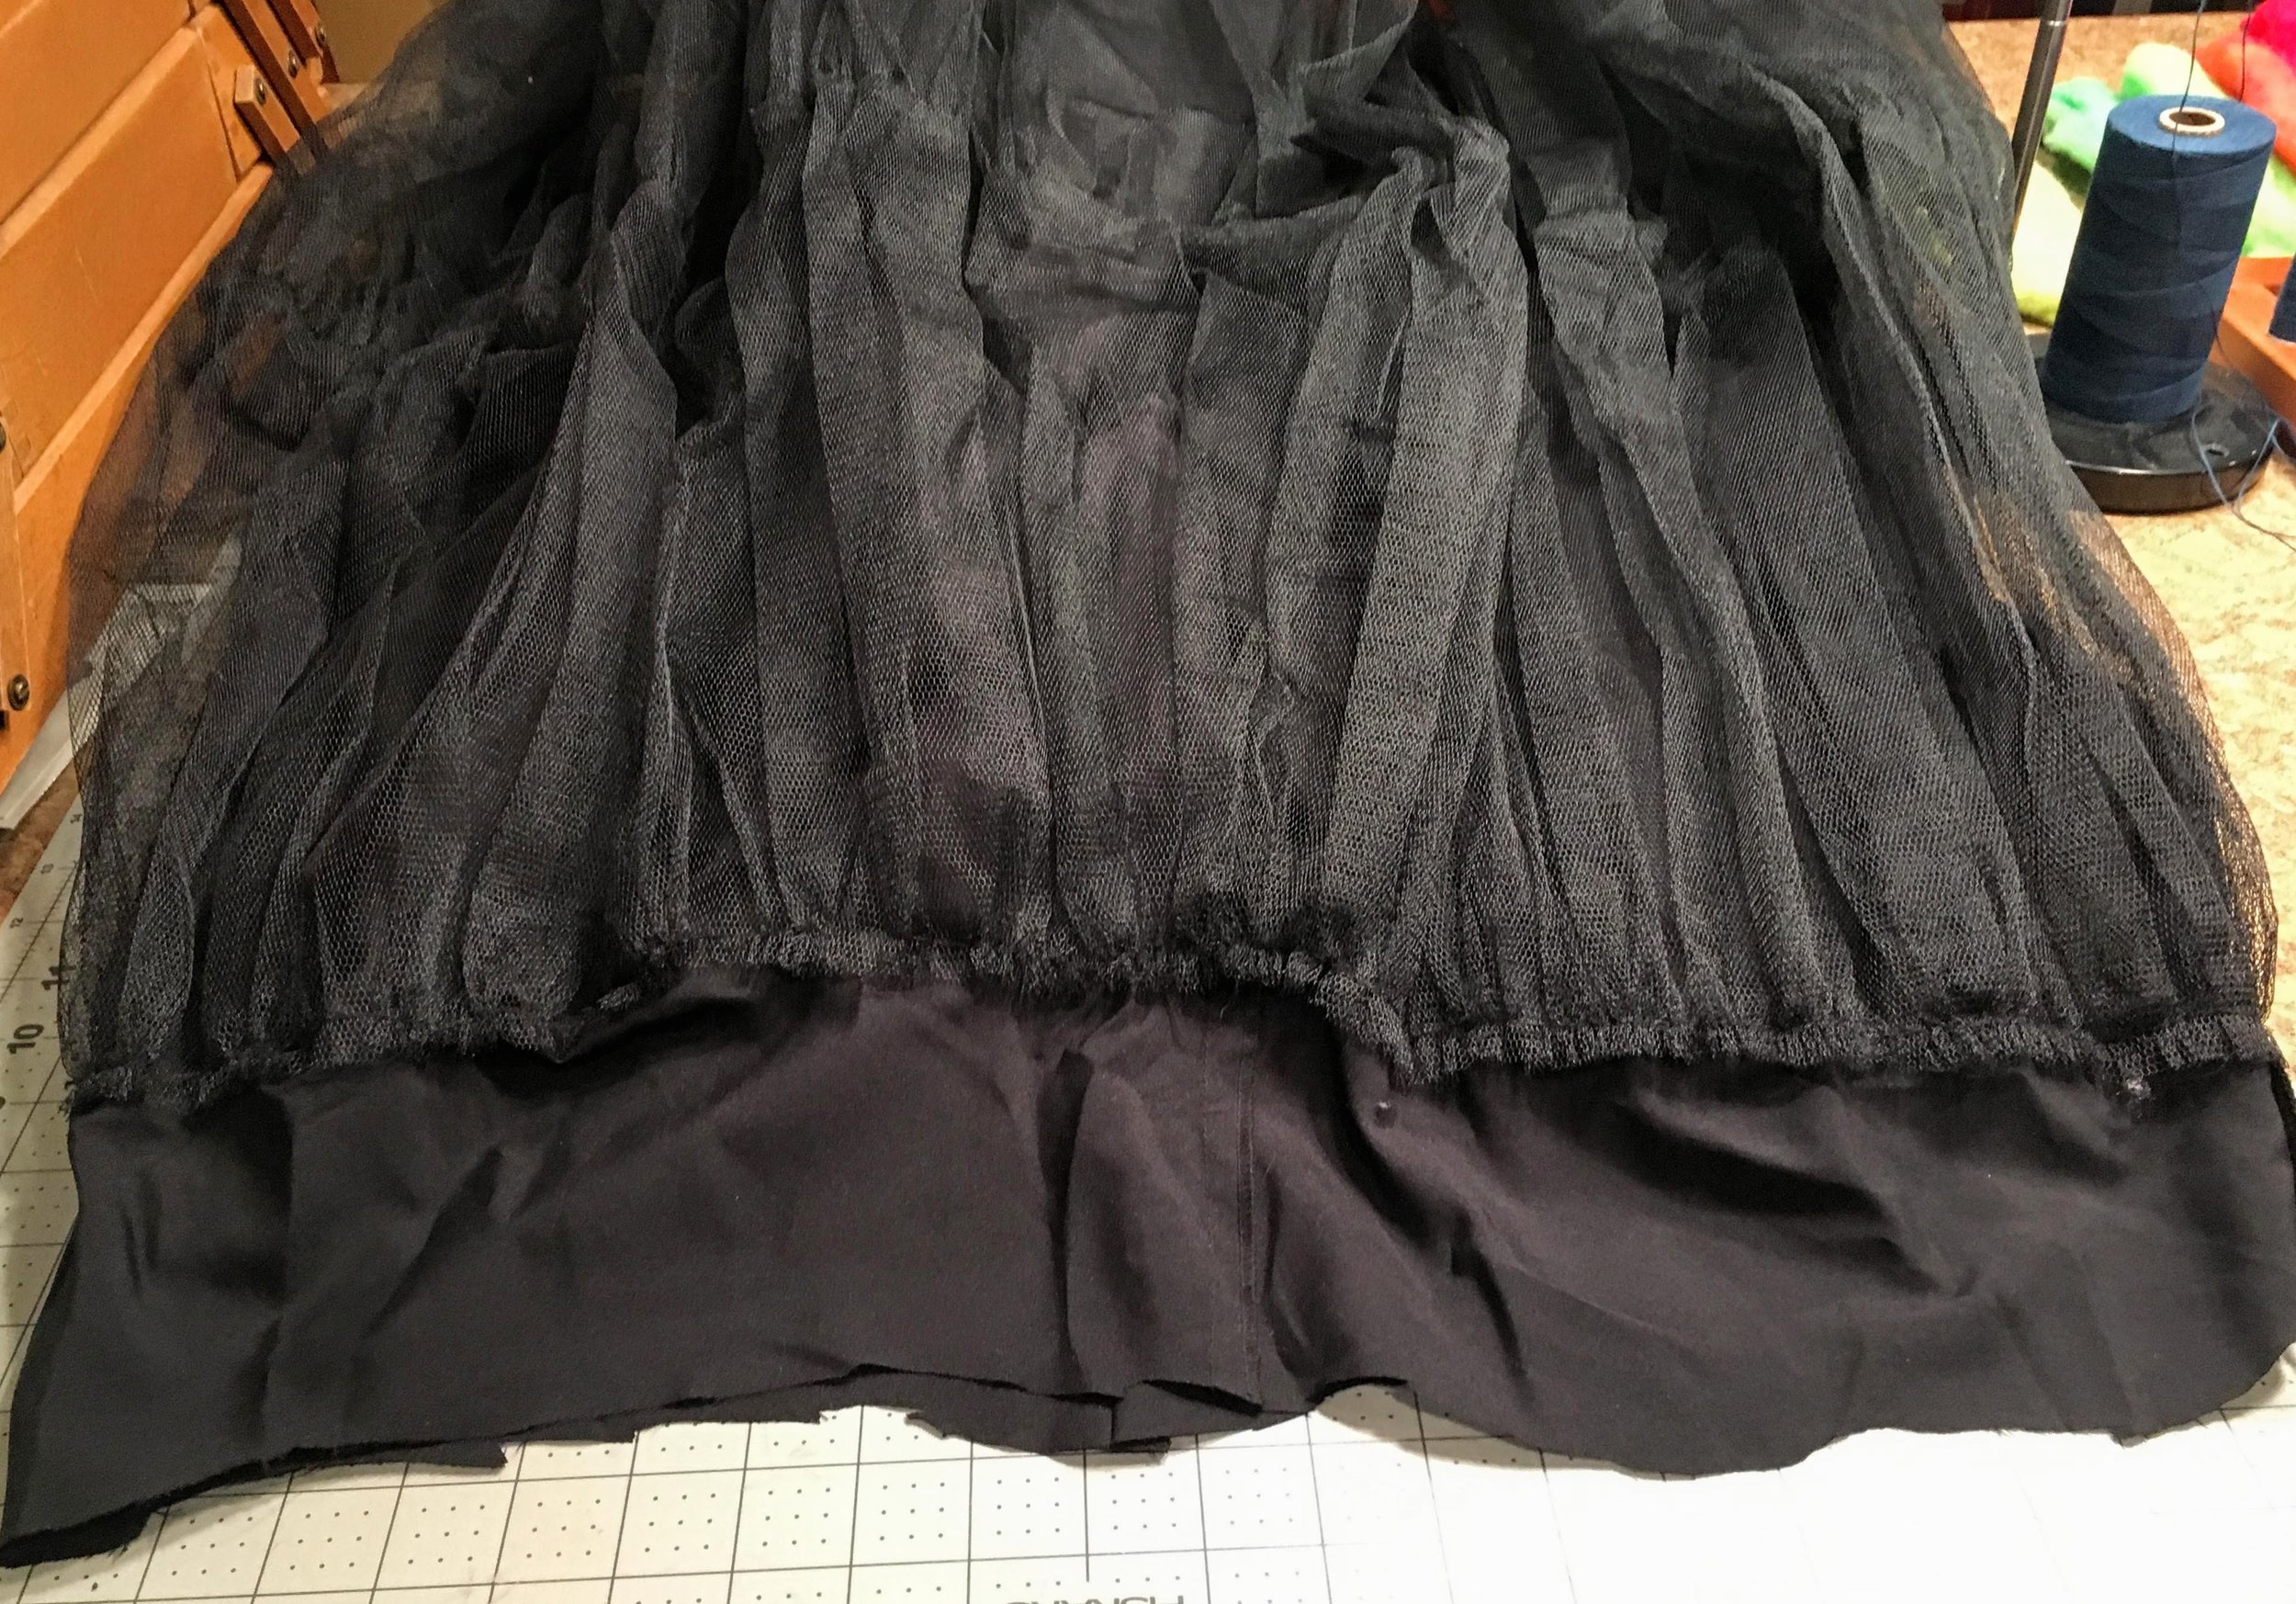 Make Your Own Petticoat from a Prom Dress — The Mermaid's Den